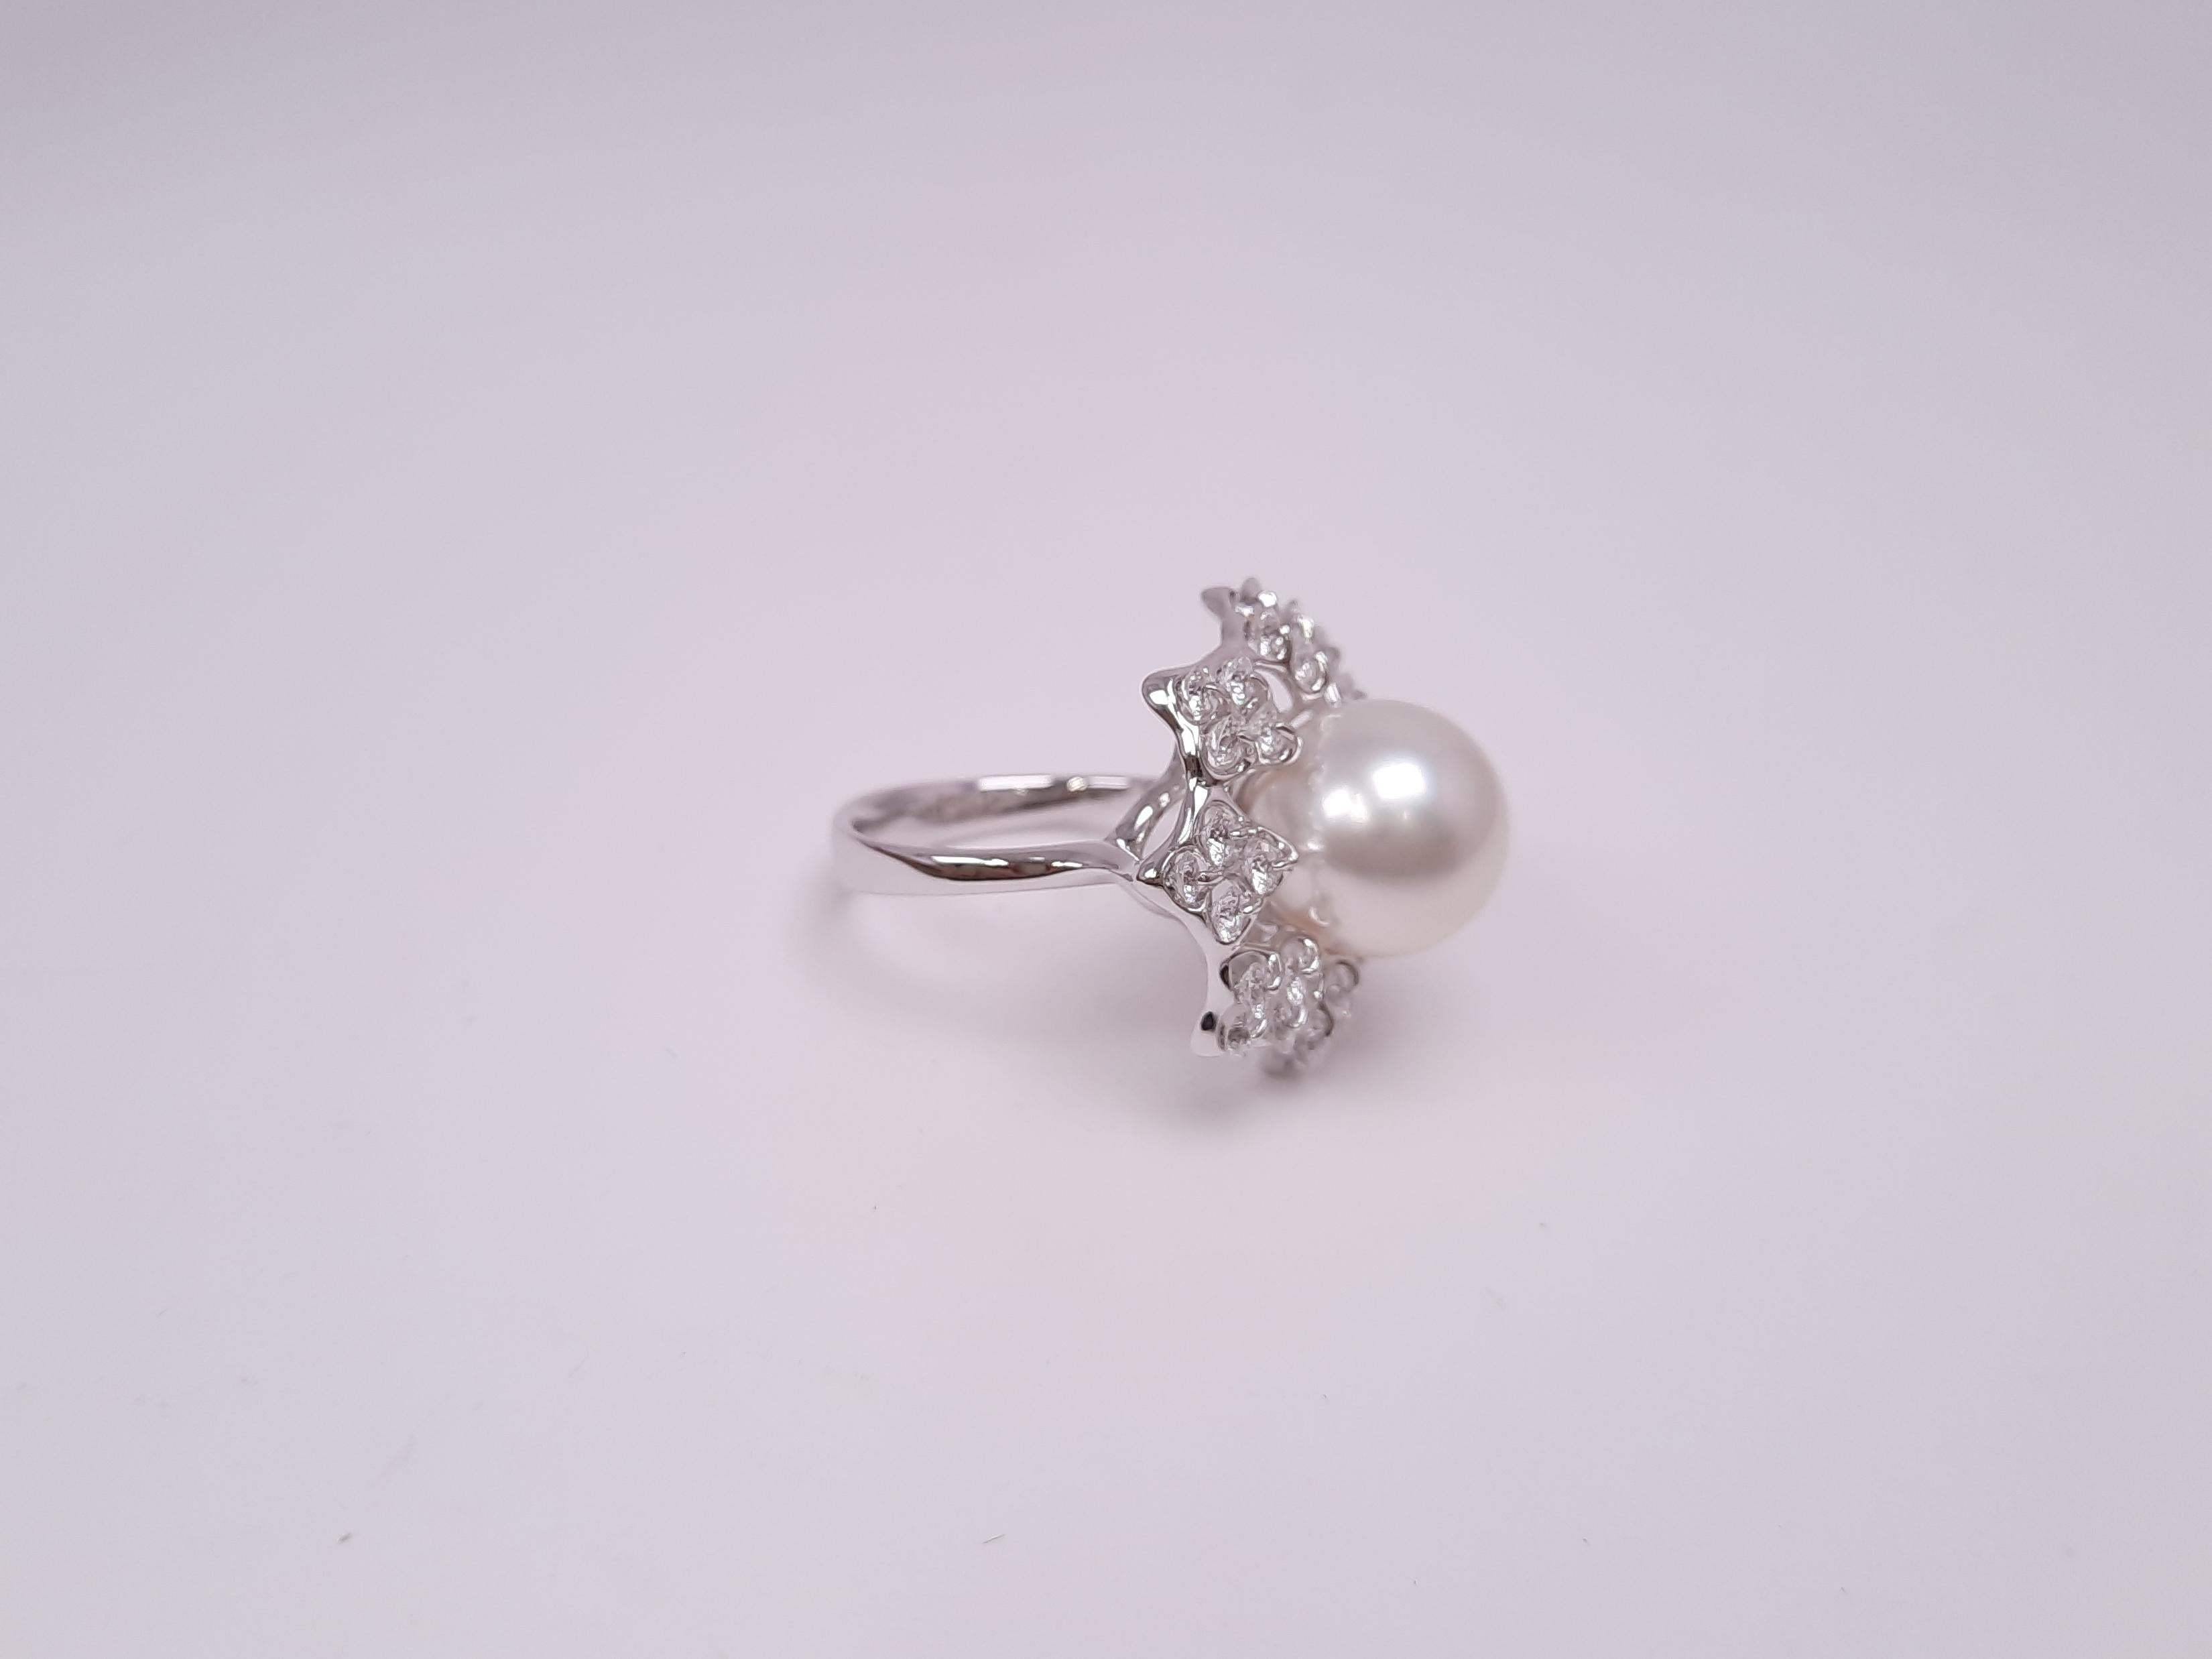 The top quality 11-12mm round South Sea Pearl is elegantly mounted in our unique jewellery setting, Waltzing Brilliance. On the ballet tutus -like design frame, high quality diamonds swirl 360 degrees on the setting just like graceful ballerinas.